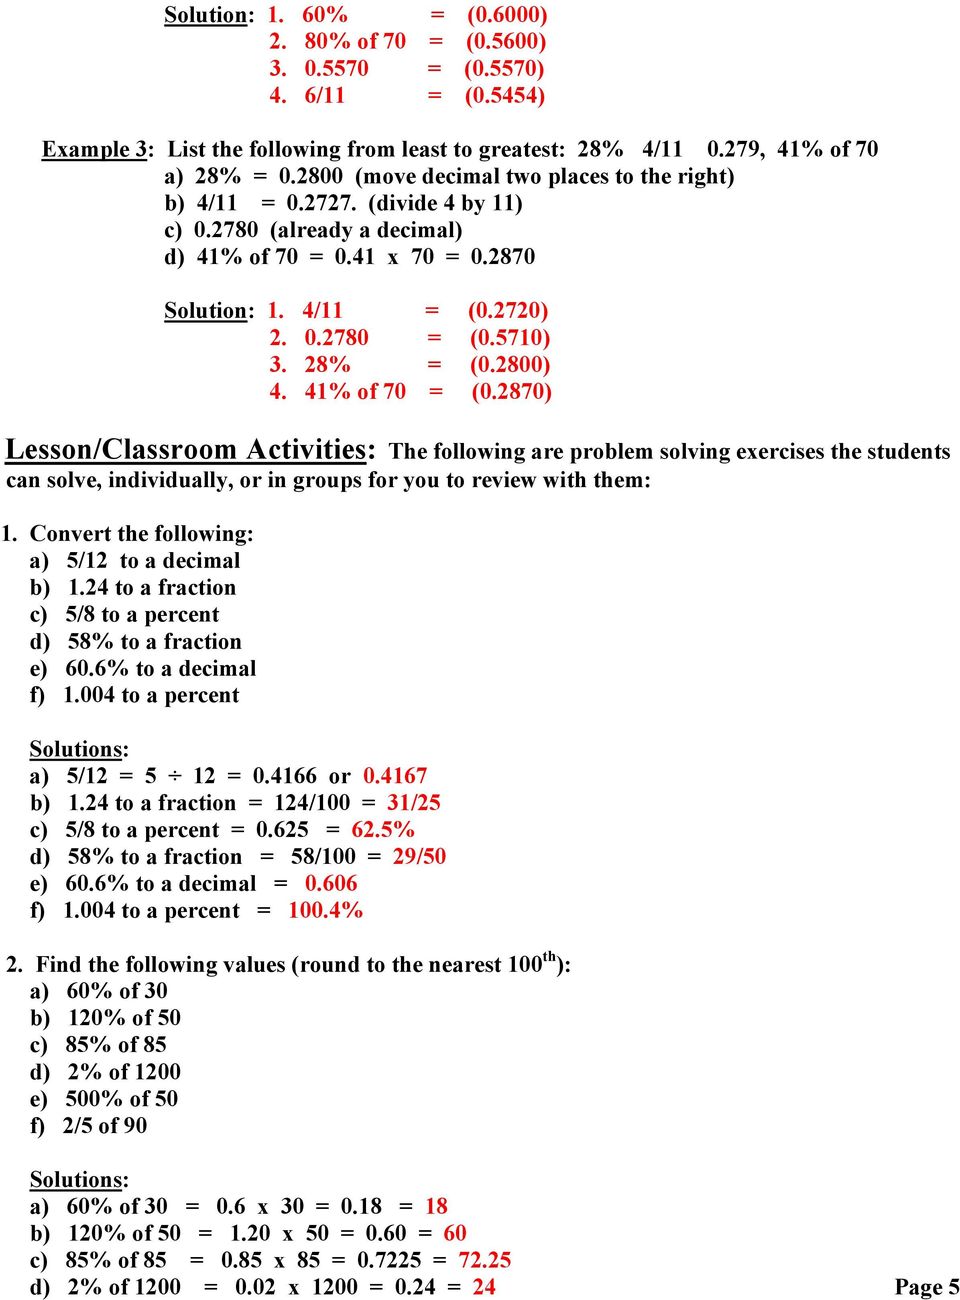 28% = (0.2800) 4. 41% of 70 = (0.2870) Lesson/Classroom Activities: The following are problem solving exercises the students can solve, individually, or in groups for you to review with them: 1.